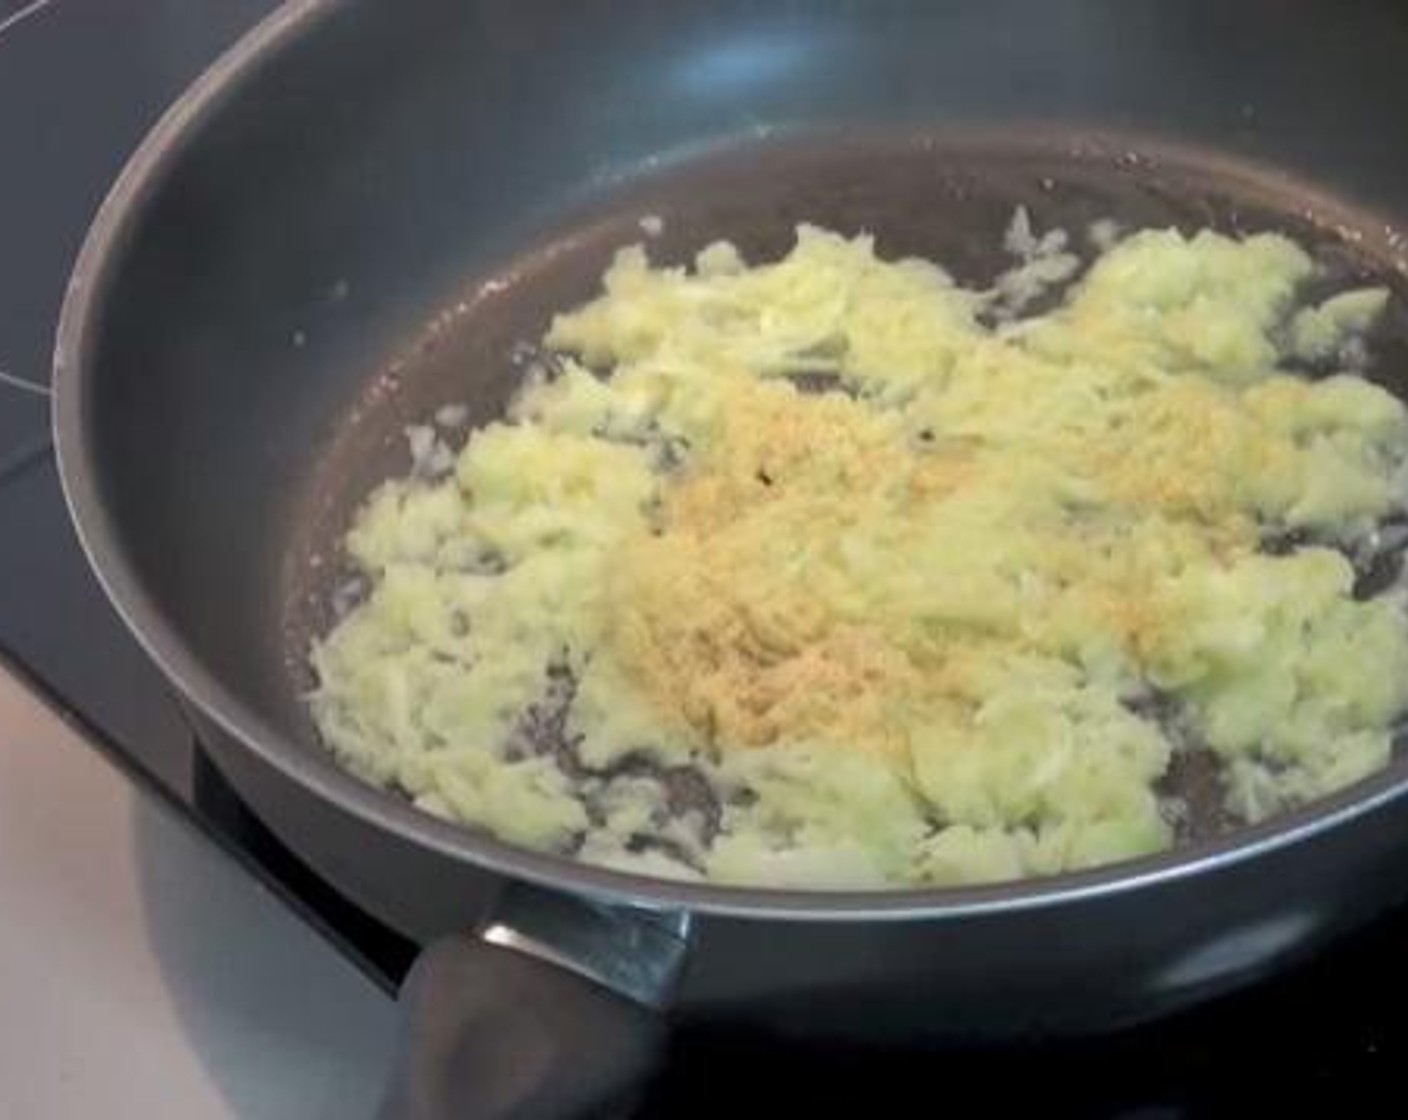 step 1 On a frying pan over medium heat, cook together the Olive Oil (1 Tbsp), grated Green Apple (1), White Onion (1) until the onion is softened.